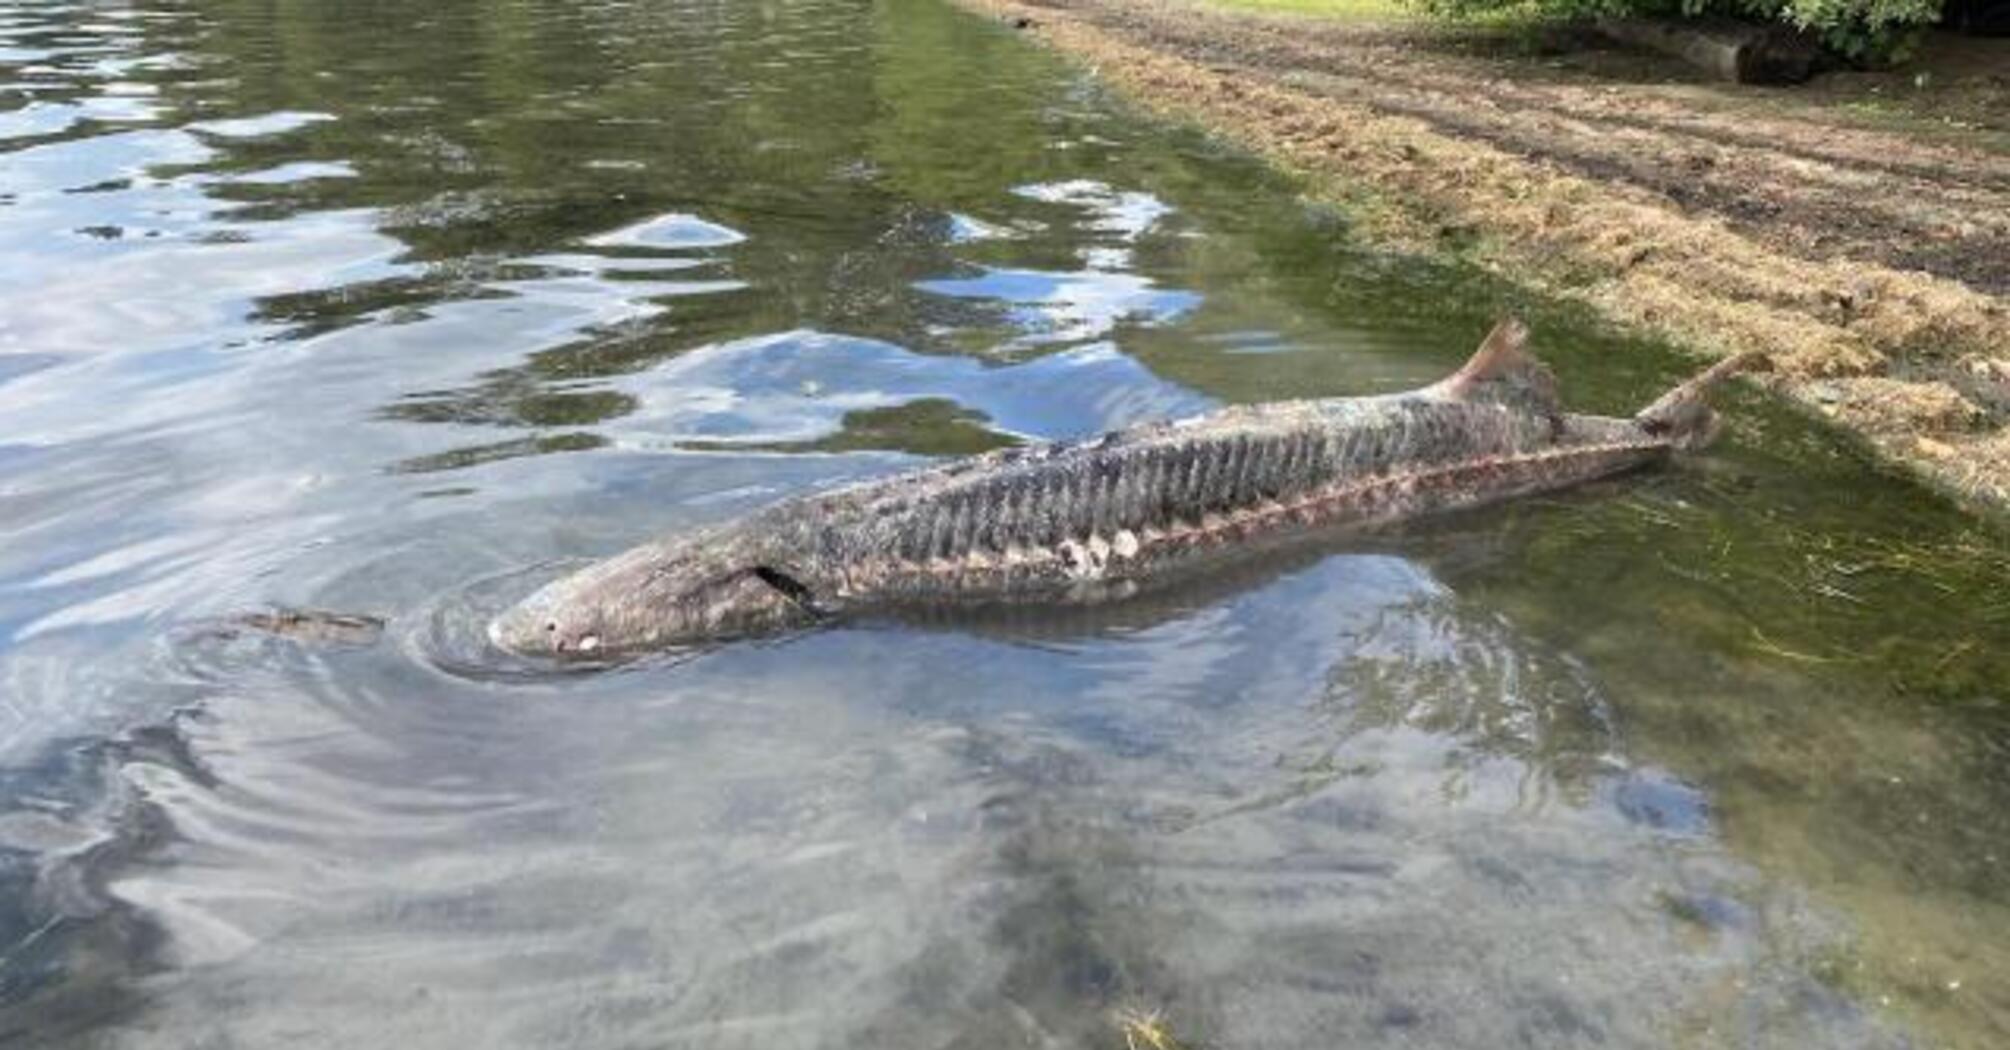 A giant white sturgeon over 8 feet long was discovered in a lake on the Washington coast. Photo